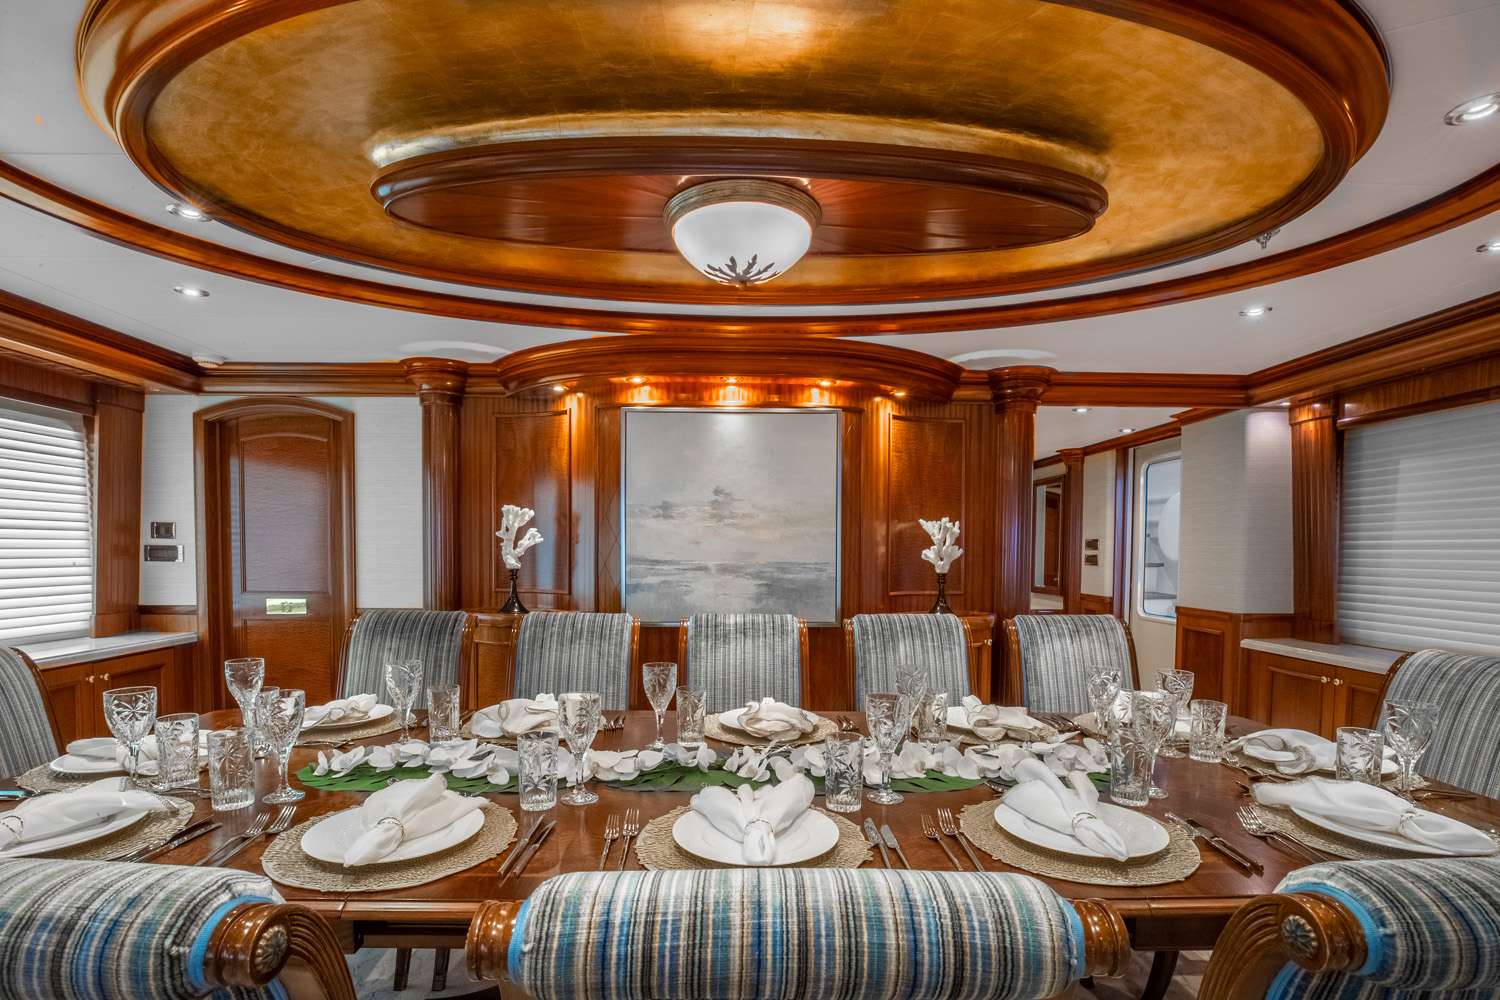 Motor Yacht 'MISS STEPHANIE' Dining, 10 PAX, 8 Crew, 138.00 Ft, 42.00 Meters, Built 2004, Richmond Yachts, Refit Year 2018